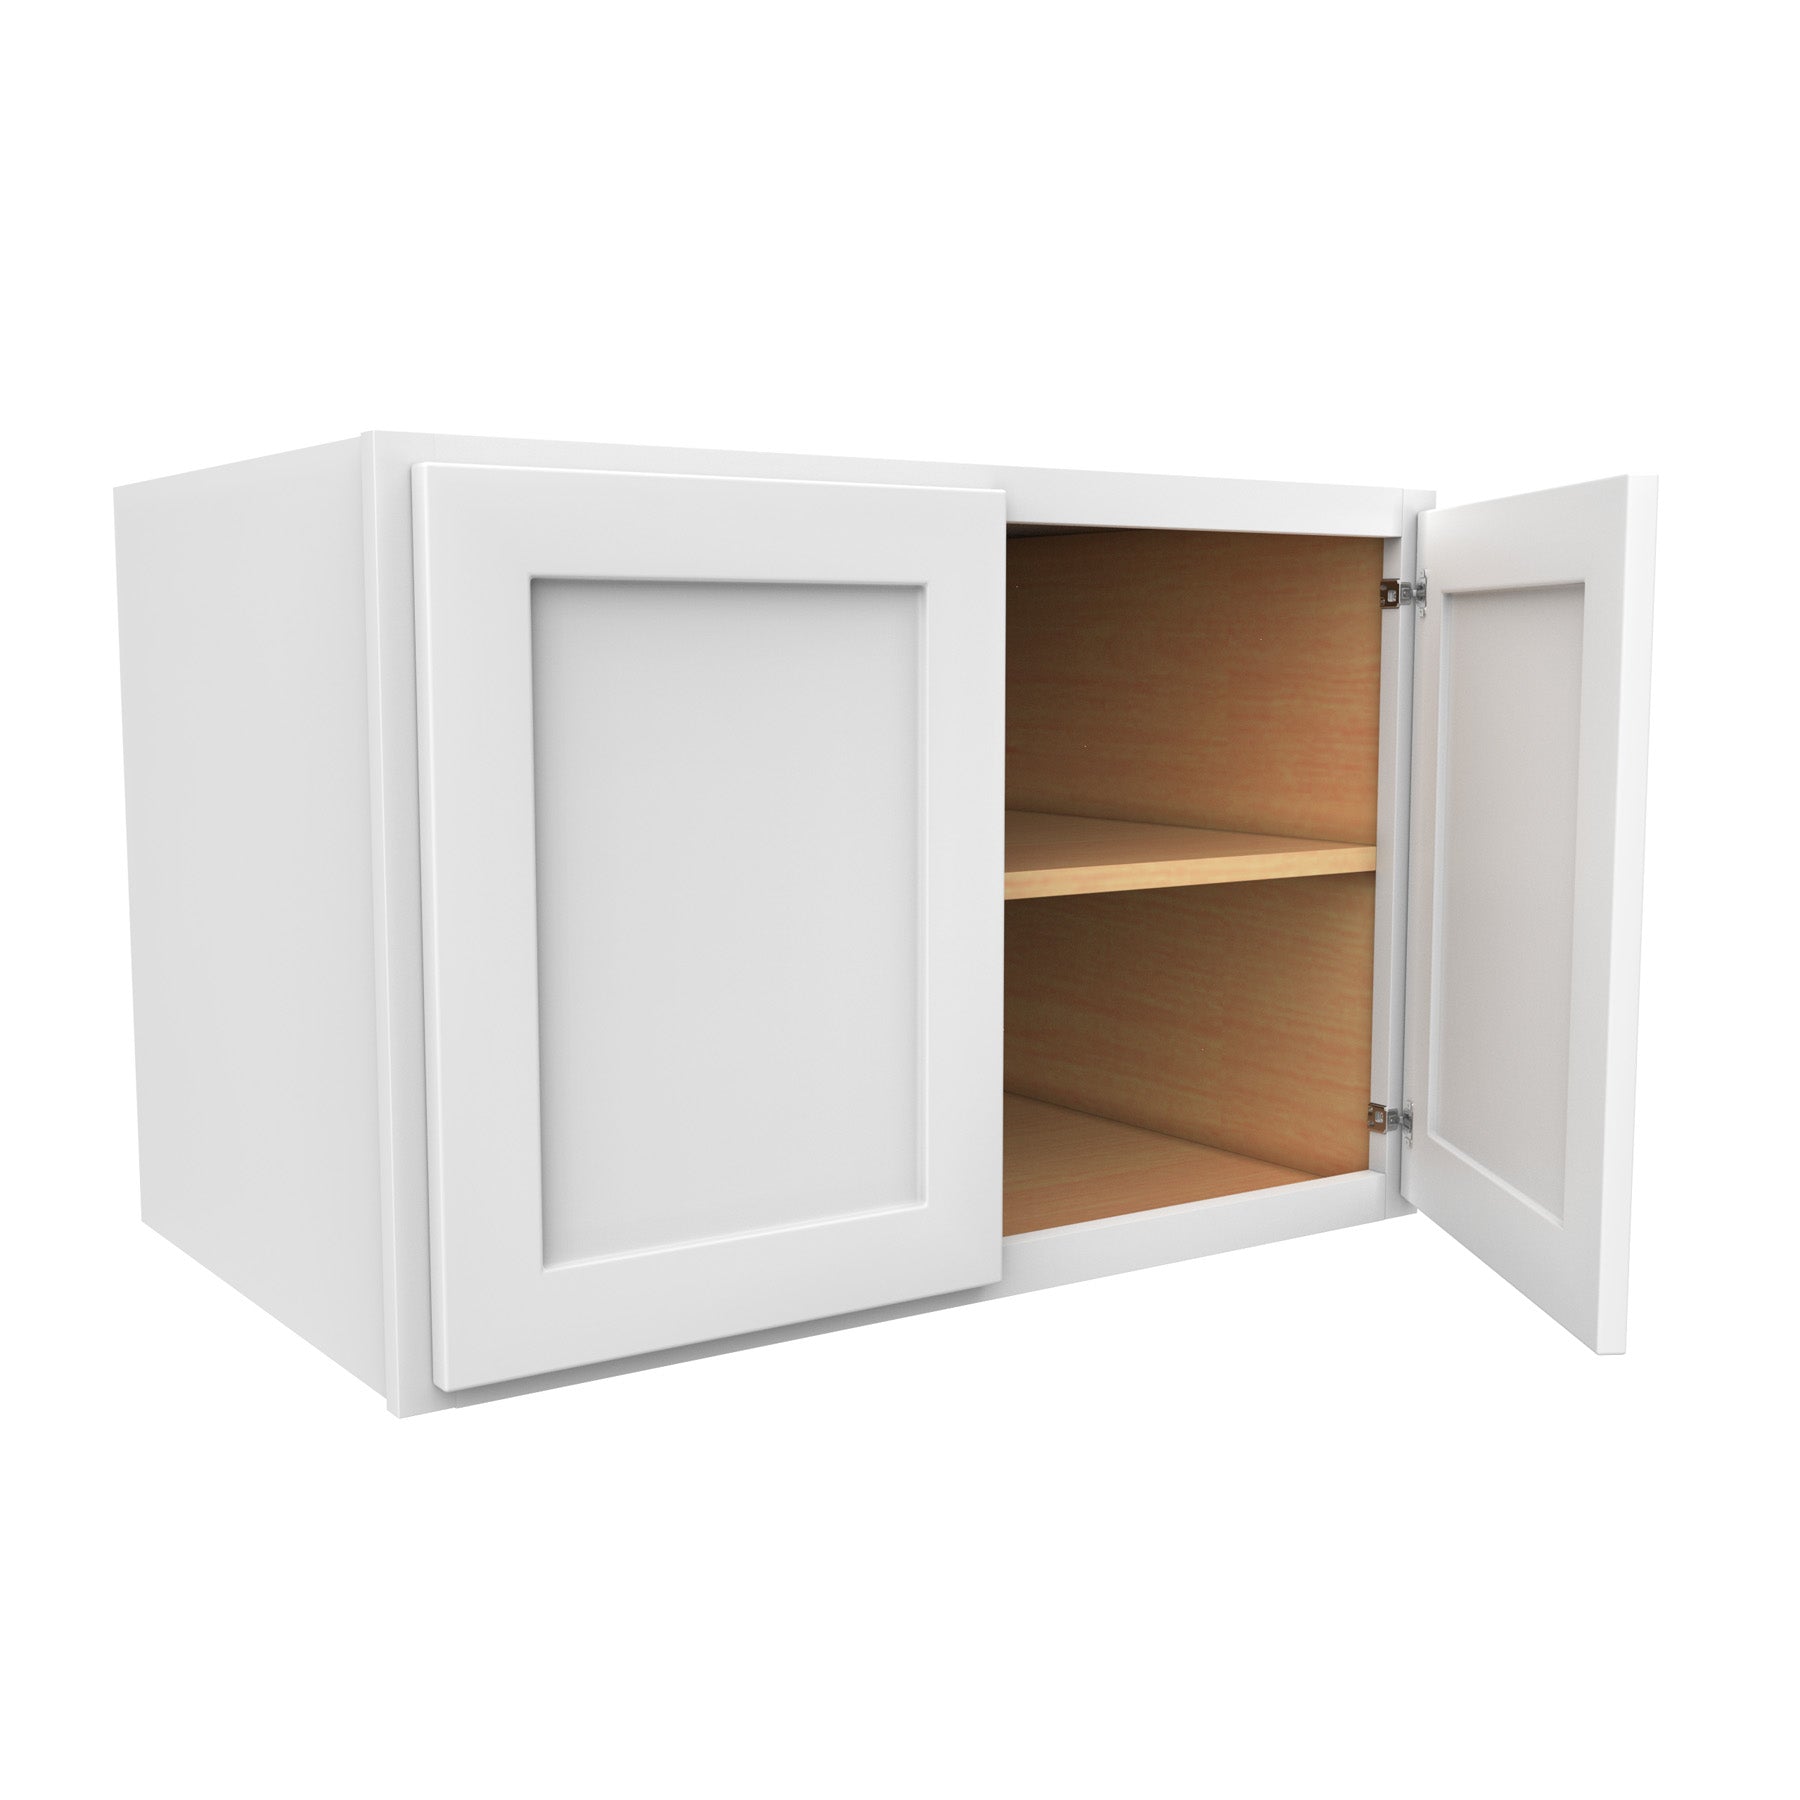 24 Inch High Above Refrigerator Deep Wall Bridge Cabinet - Luxor White Shaker - Ready To Assemble, 36"W x 24"H x 24"D